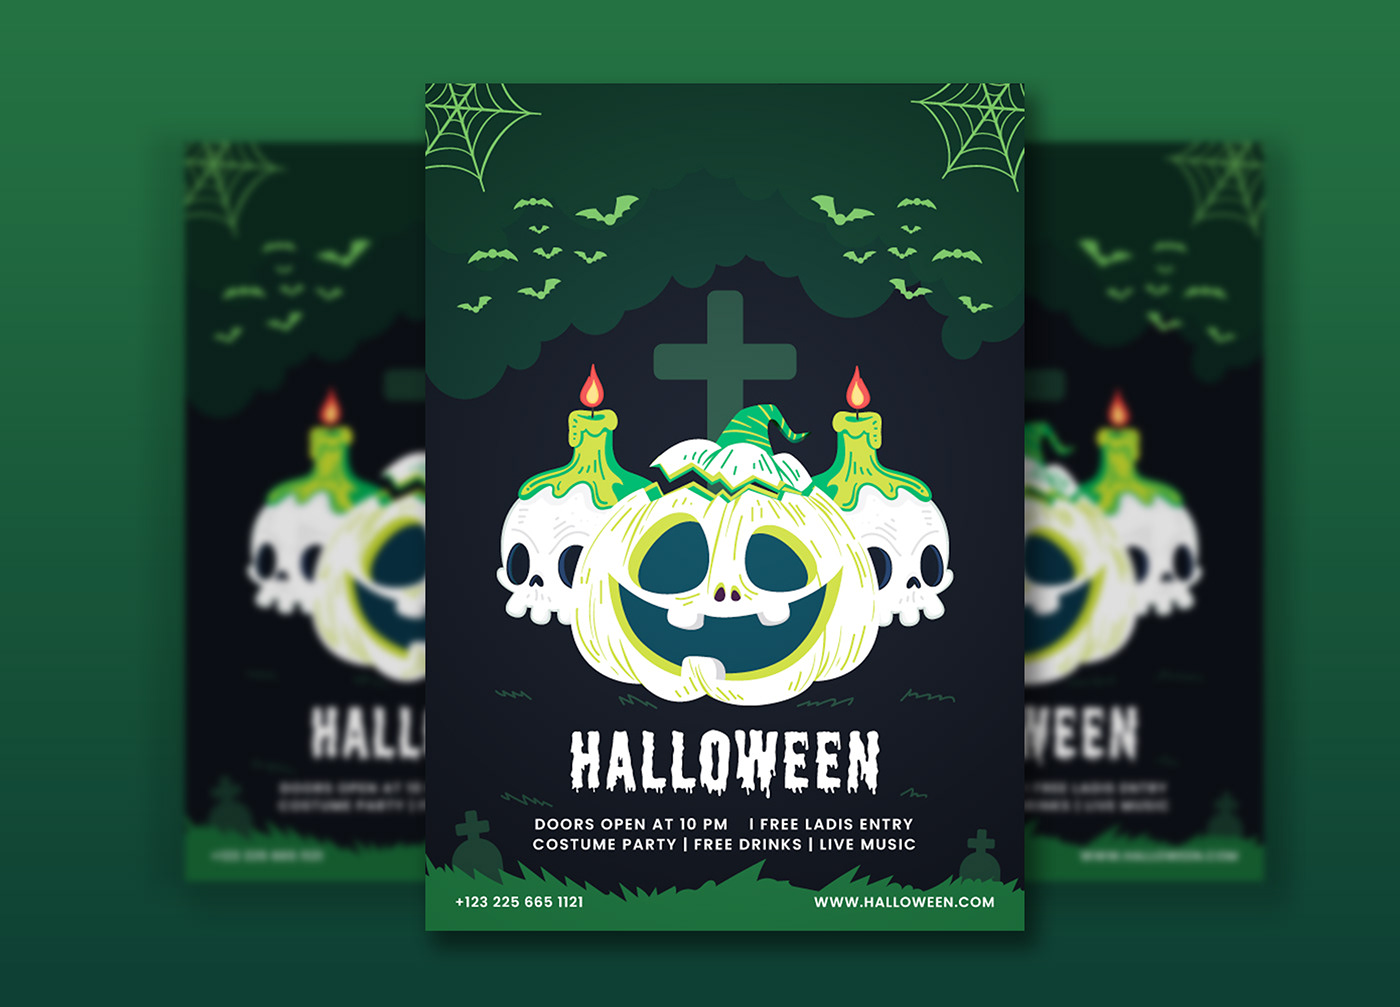 HALLOWEEN PARTY FLYER Event Card Design Halloween party night party flyer DJ Club FREE flyer psd template flyer mockup free halloween evevt card halloween invetition card